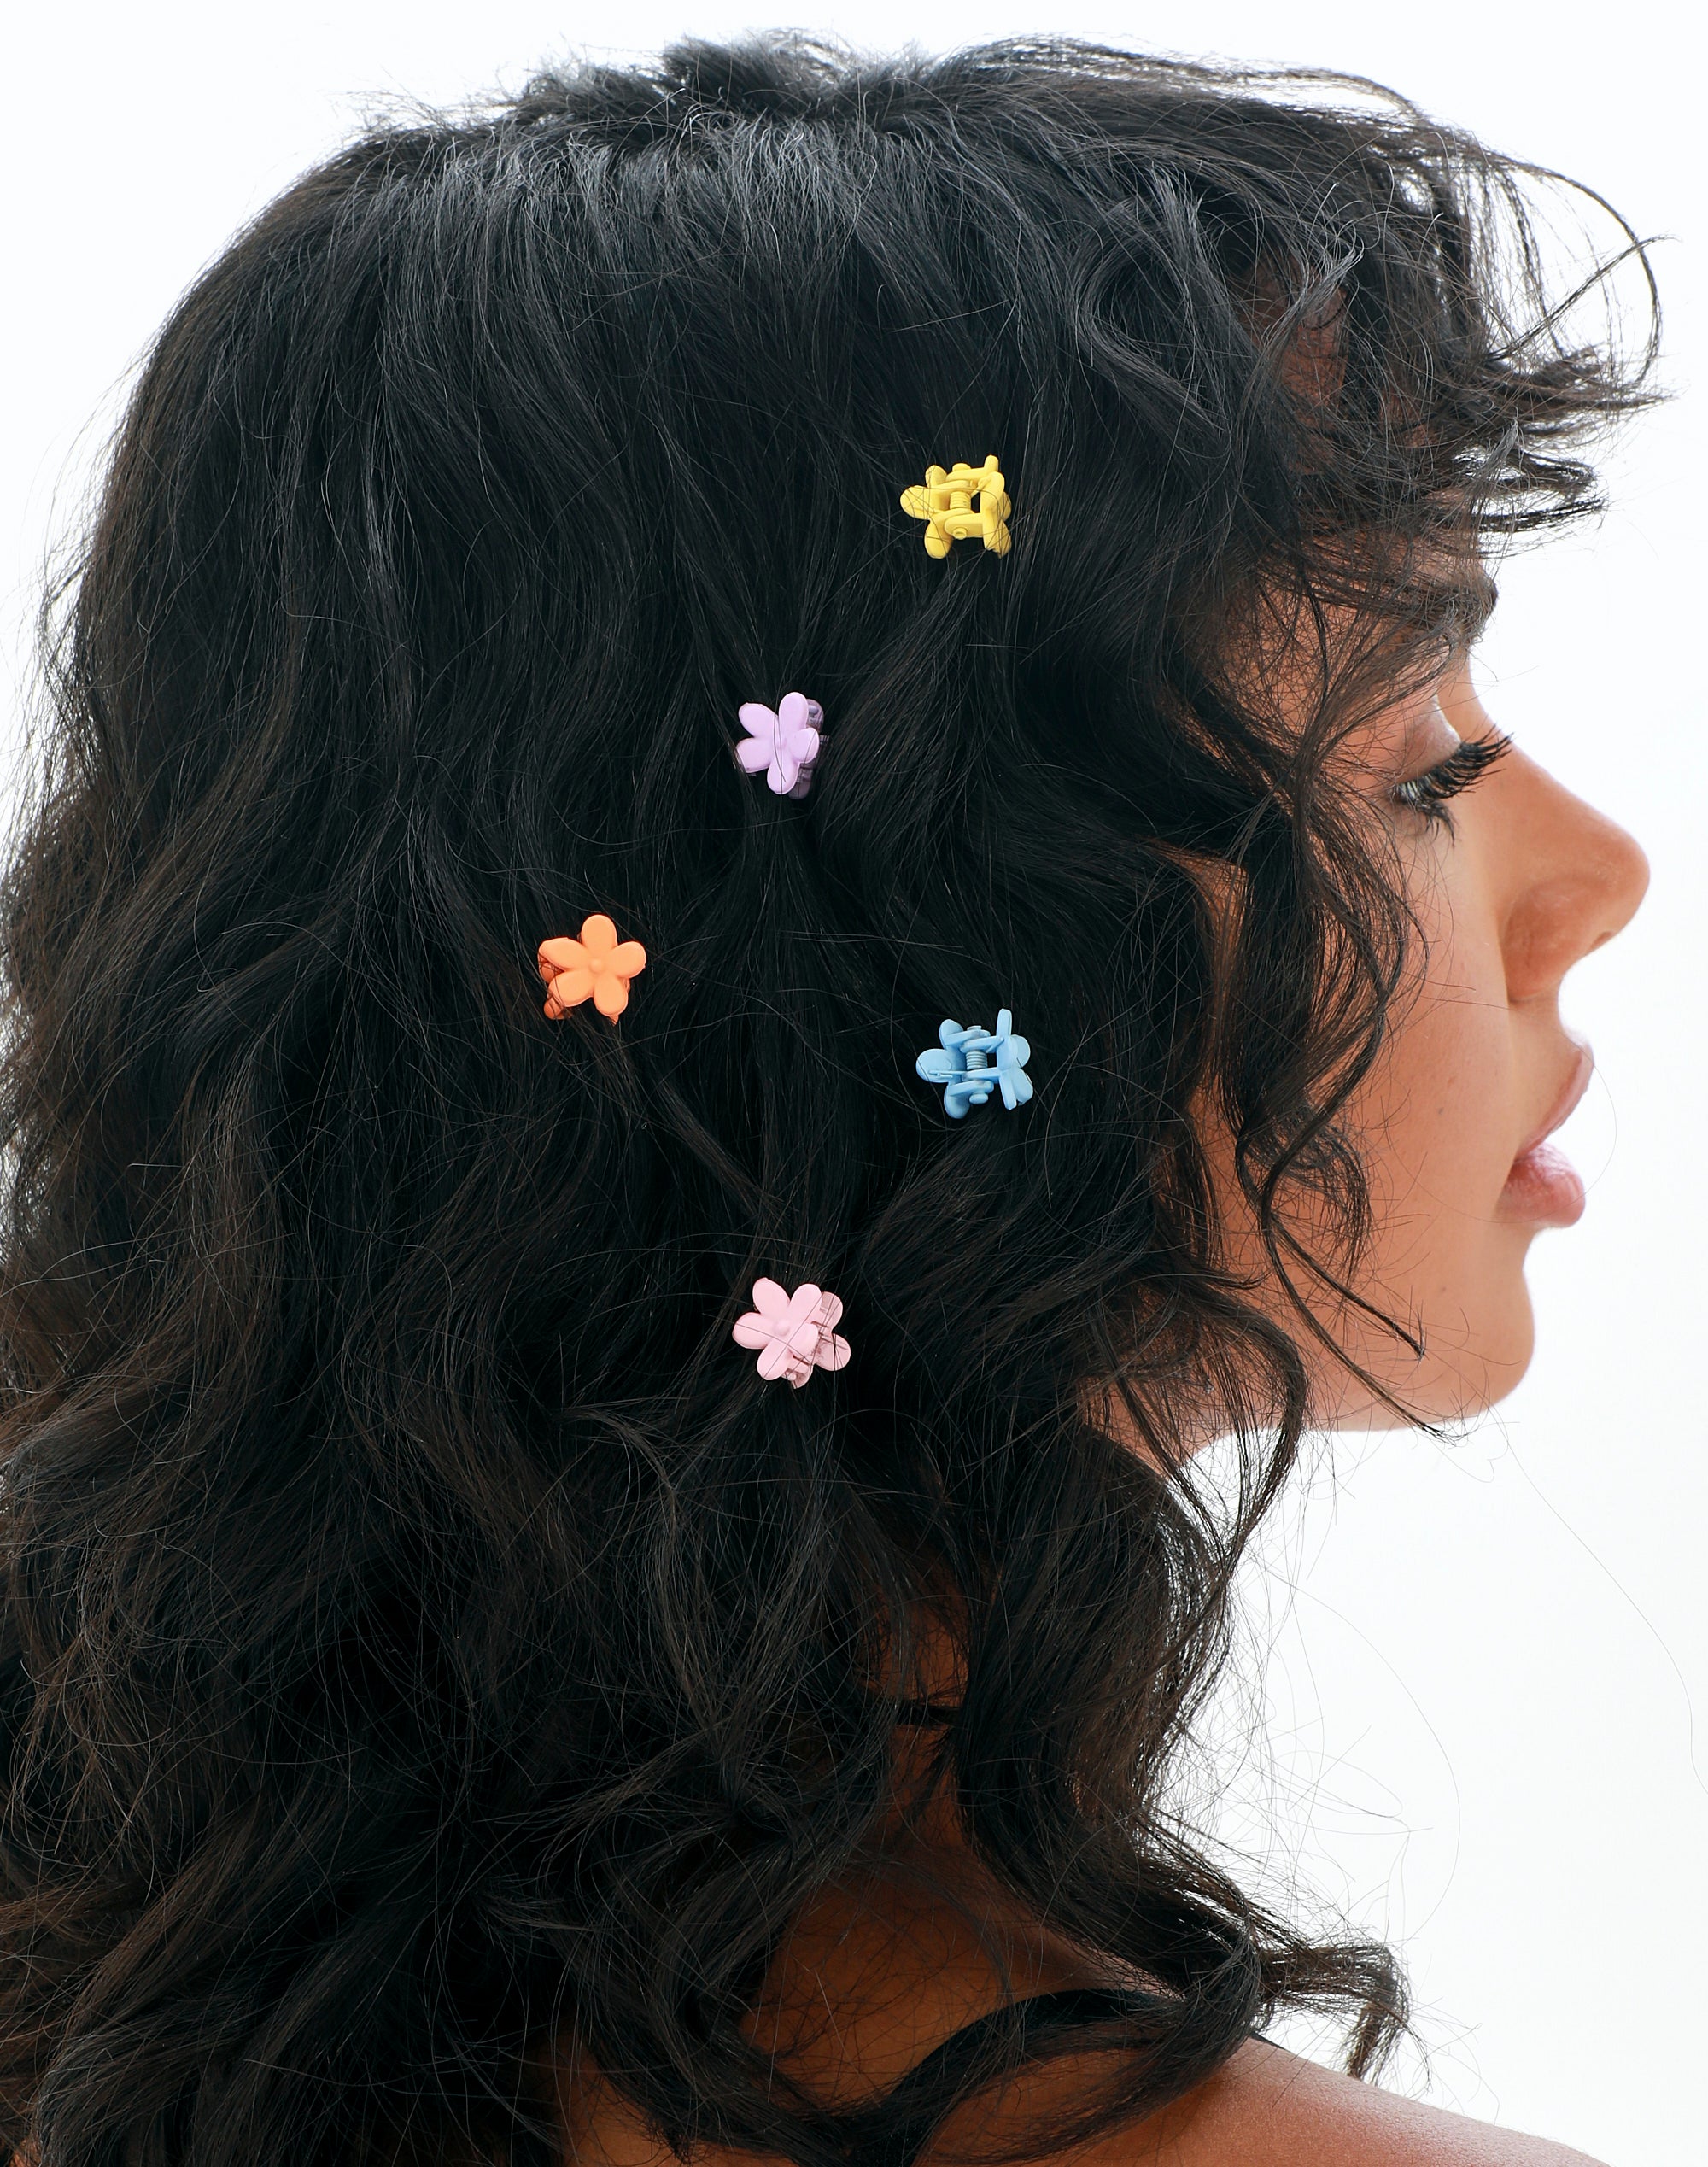 Wedding Hair with Flowers: 18 Floral Wedding Hairstyles and Accessories -  hitched.co.uk - hitched.co.uk